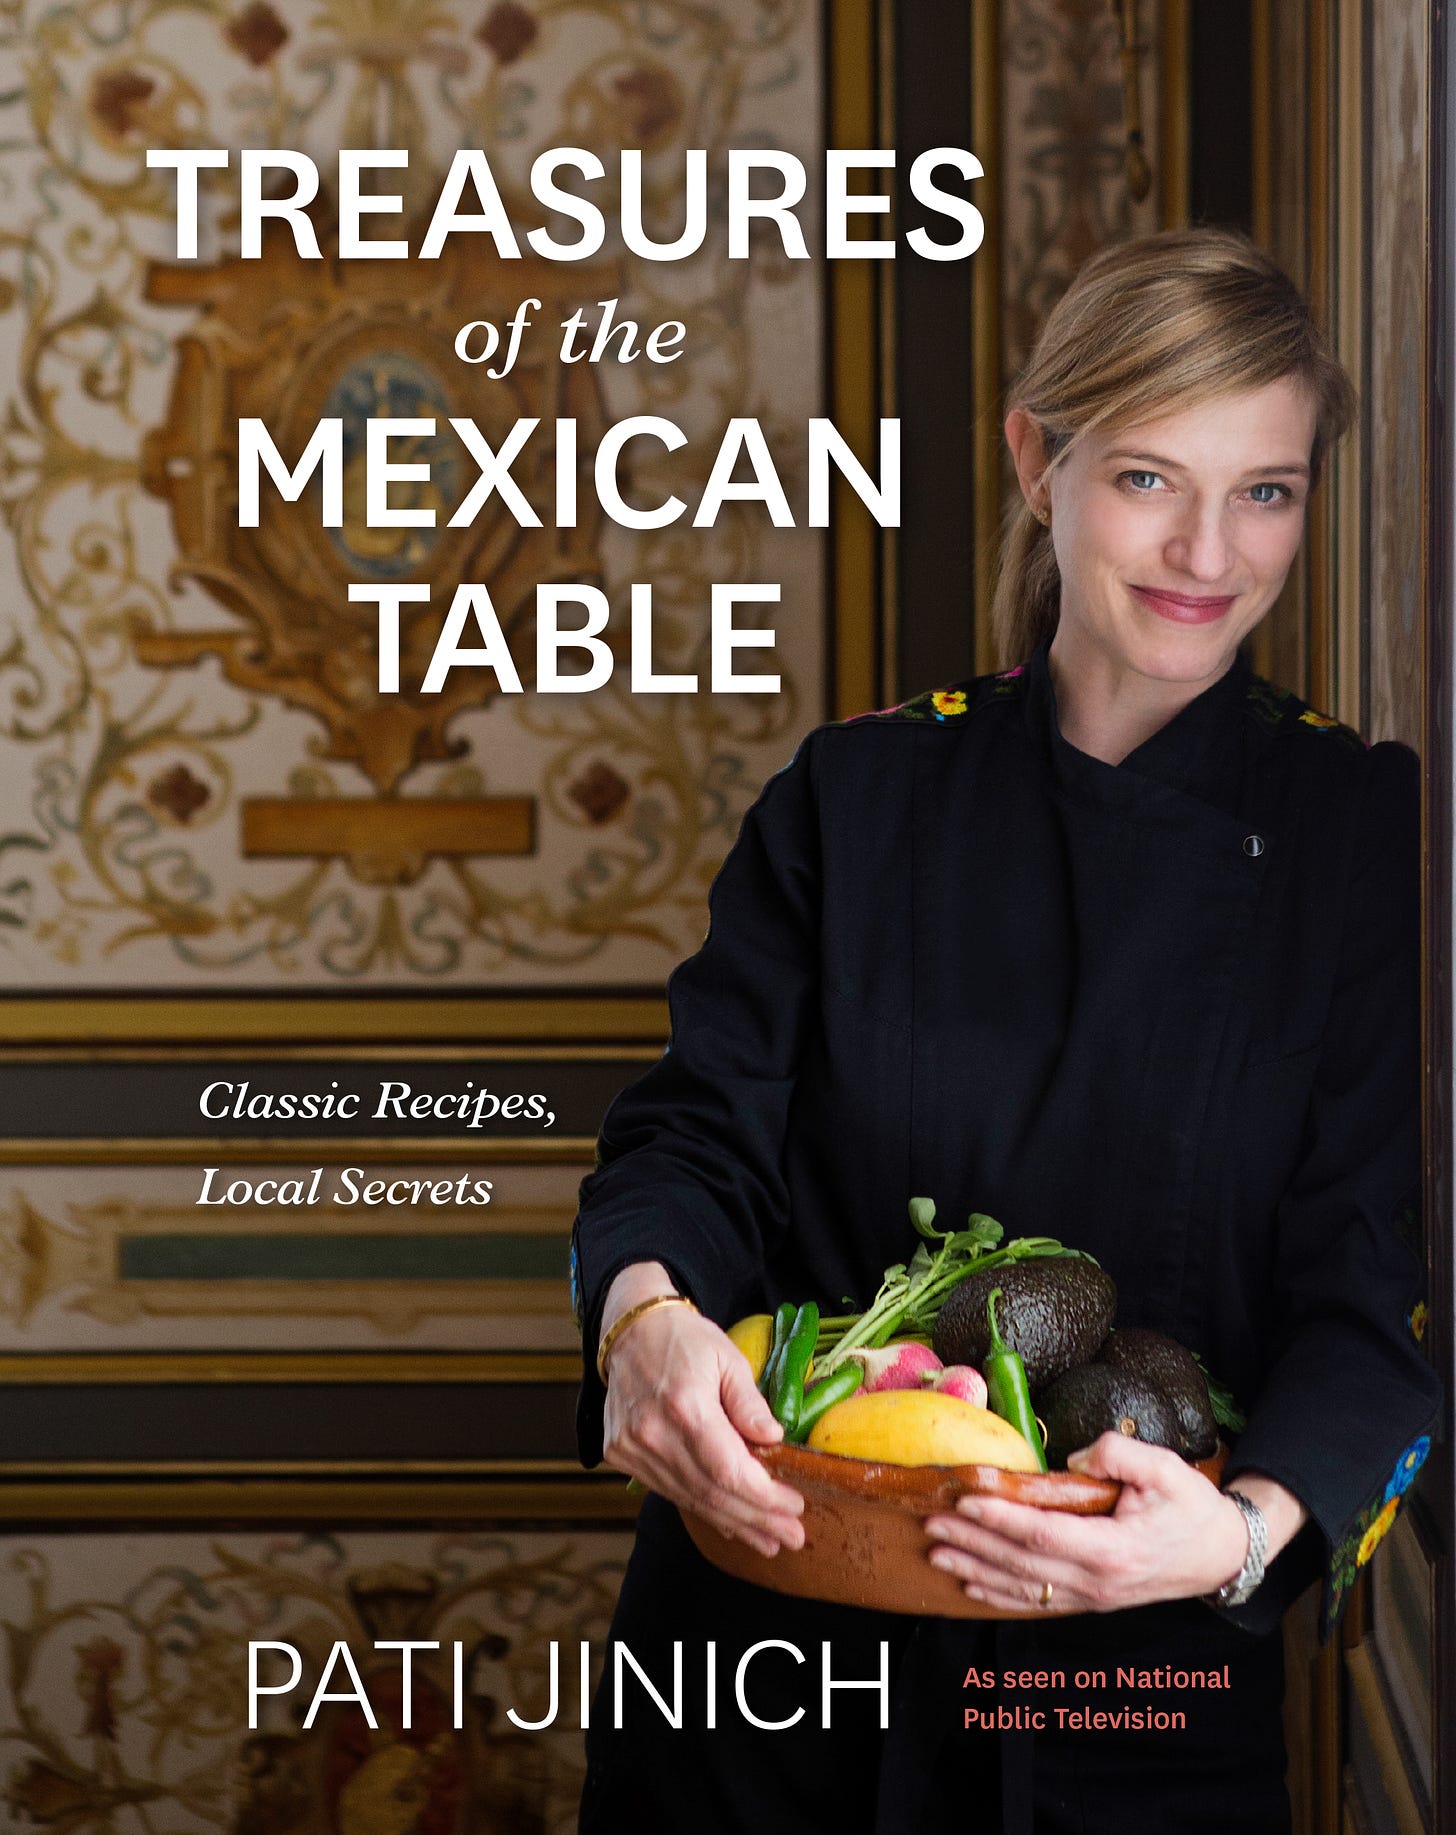 Pati Jinich with a bowl of fresh produce in her arms on the cover of her cookbook, Treasures of the Mexican Table